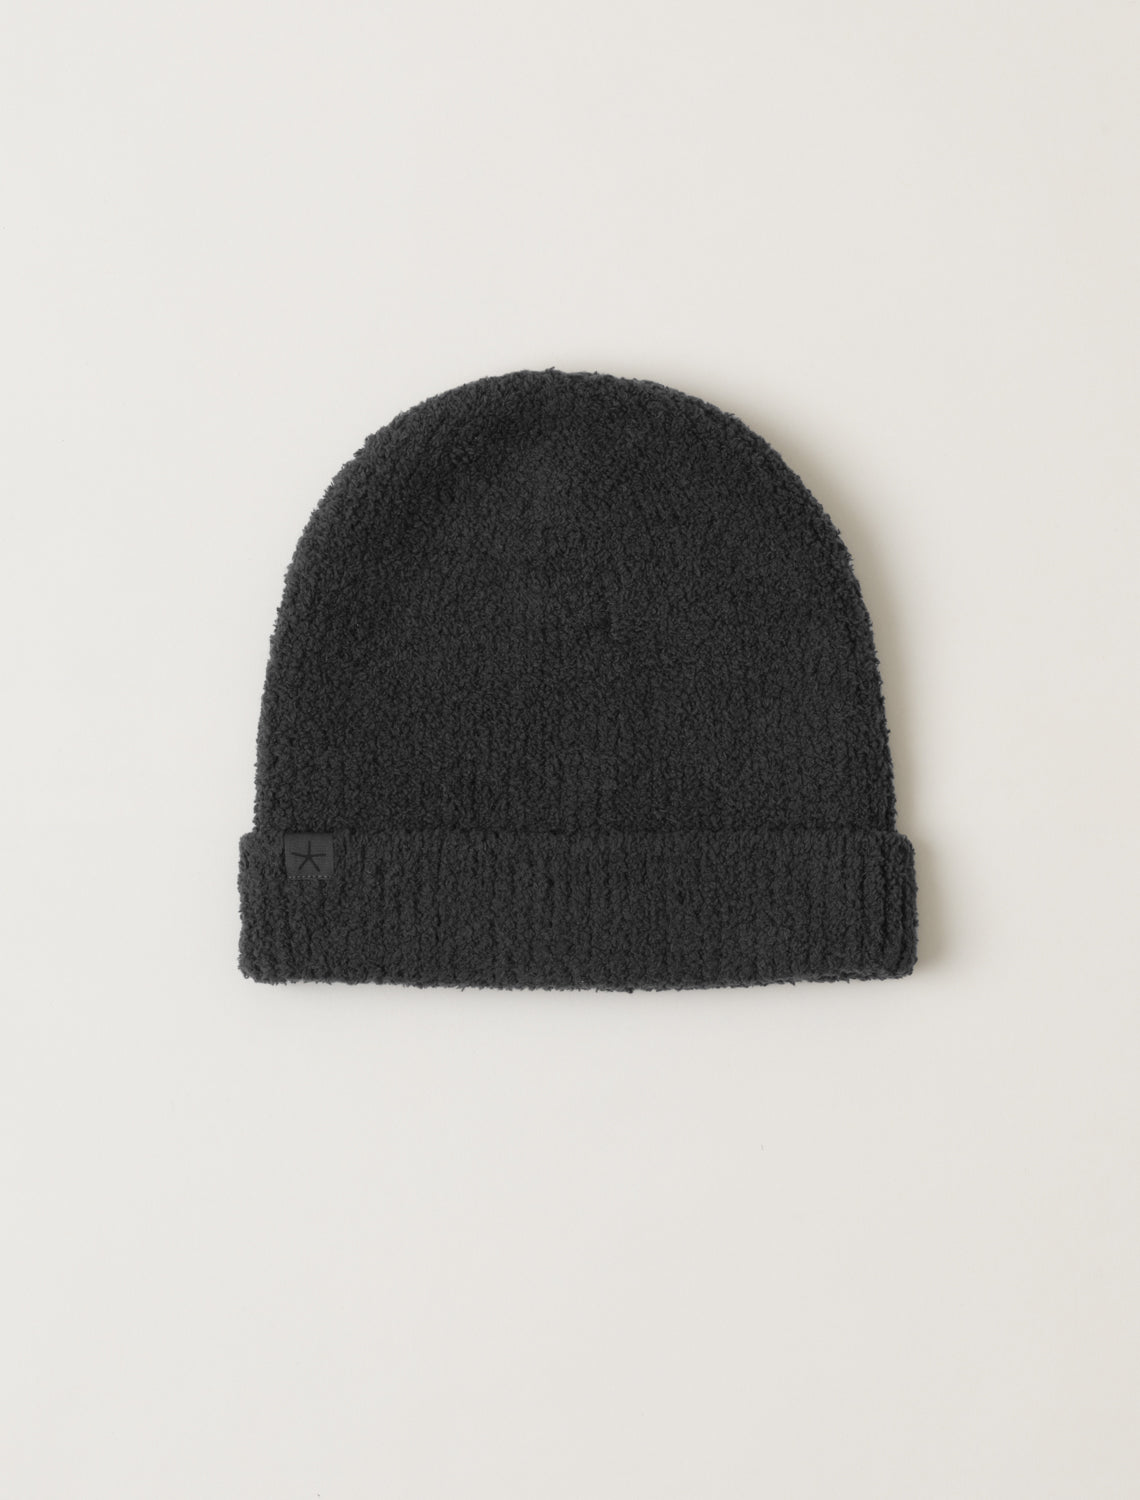 CozyChic Ribbed Beanie by Barefoot Dreams - Carbon